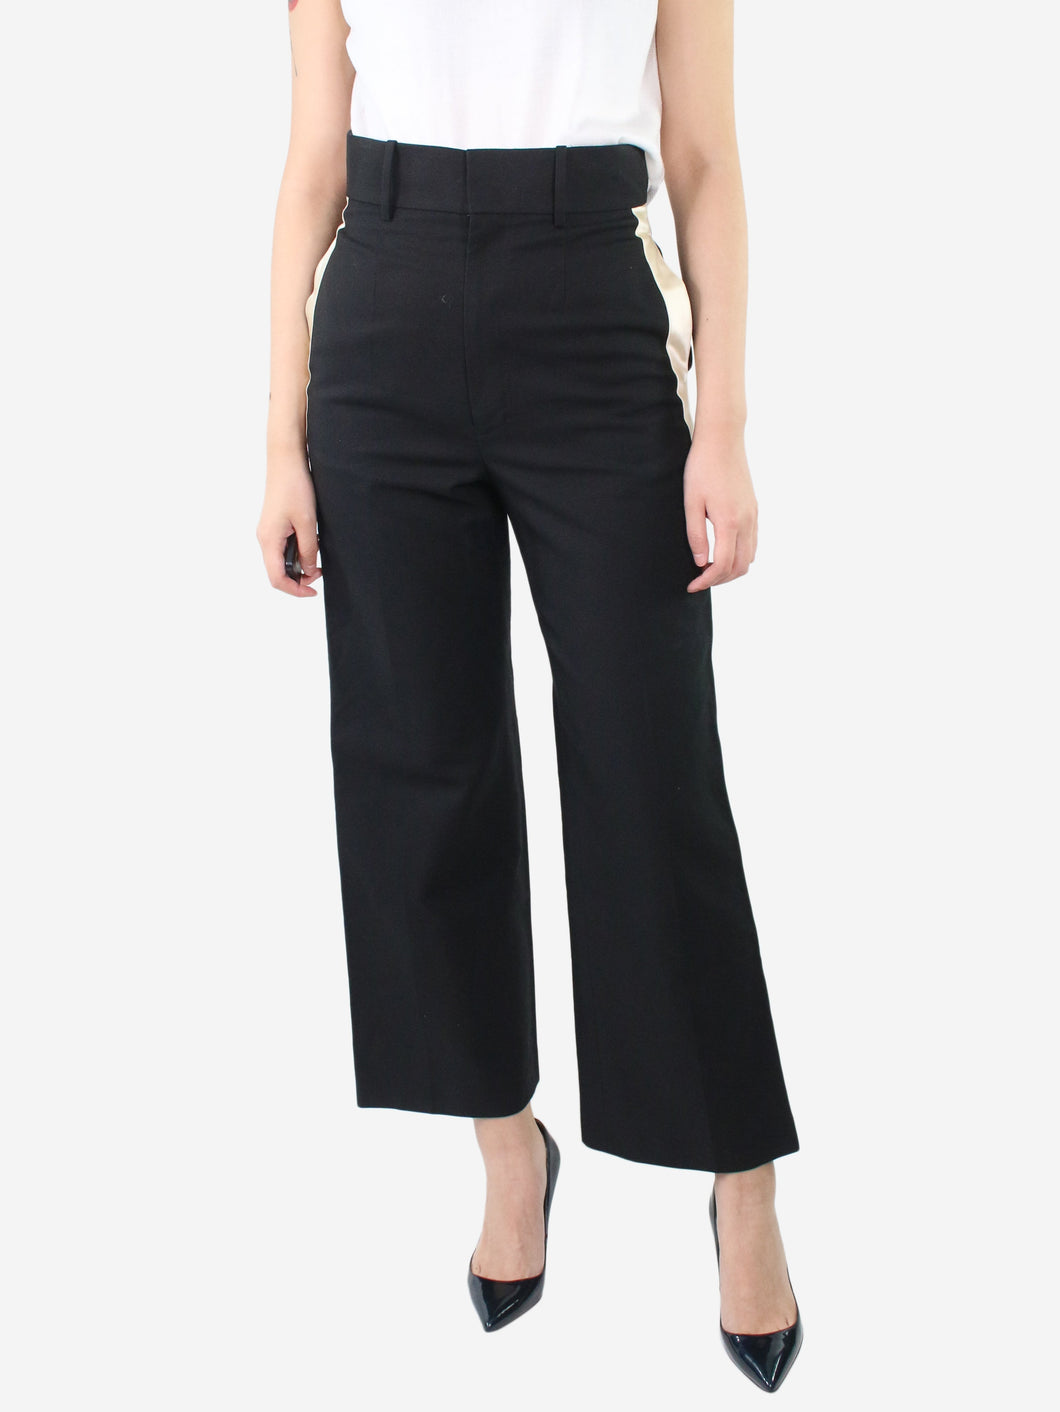 Black high-rise striped trousers - size UK 8 Trousers Helmut Lang 